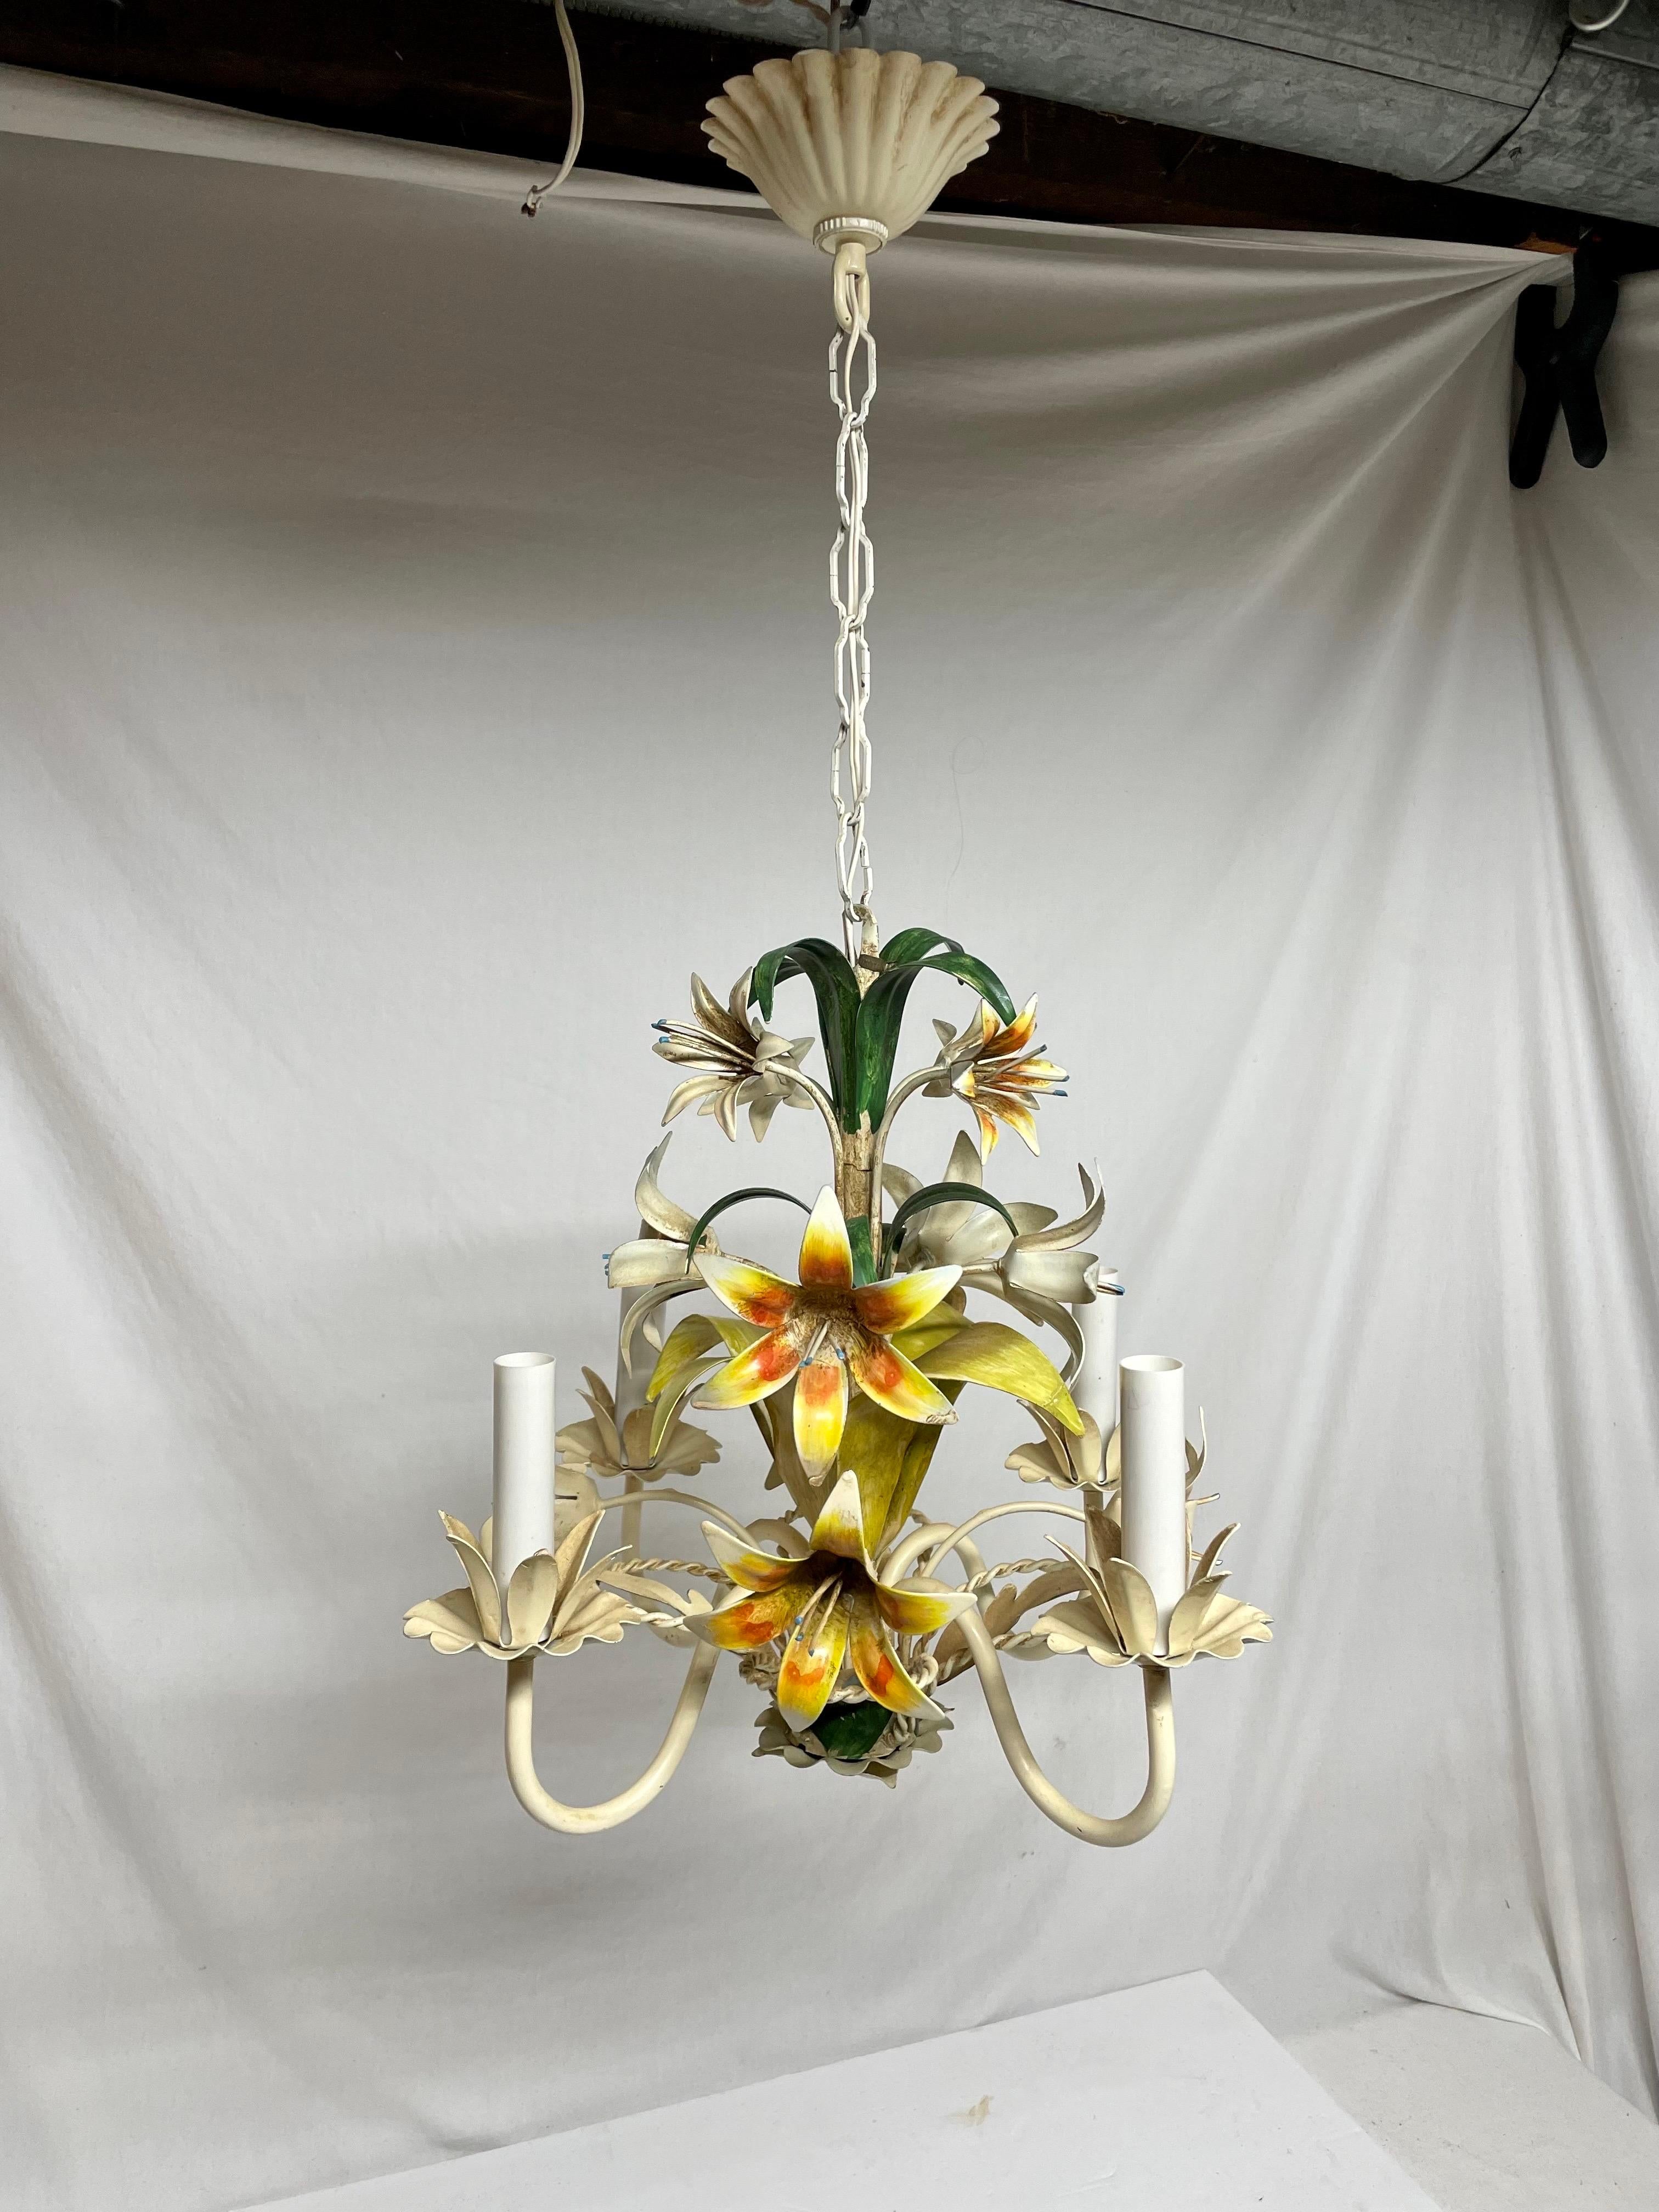 Italian floral tole four arm chandelier. Lots of  Lily flowers in cream and yellow-reds with green leaves.  Some chipping paint that adds to the character. In good working condition. Measures: 16